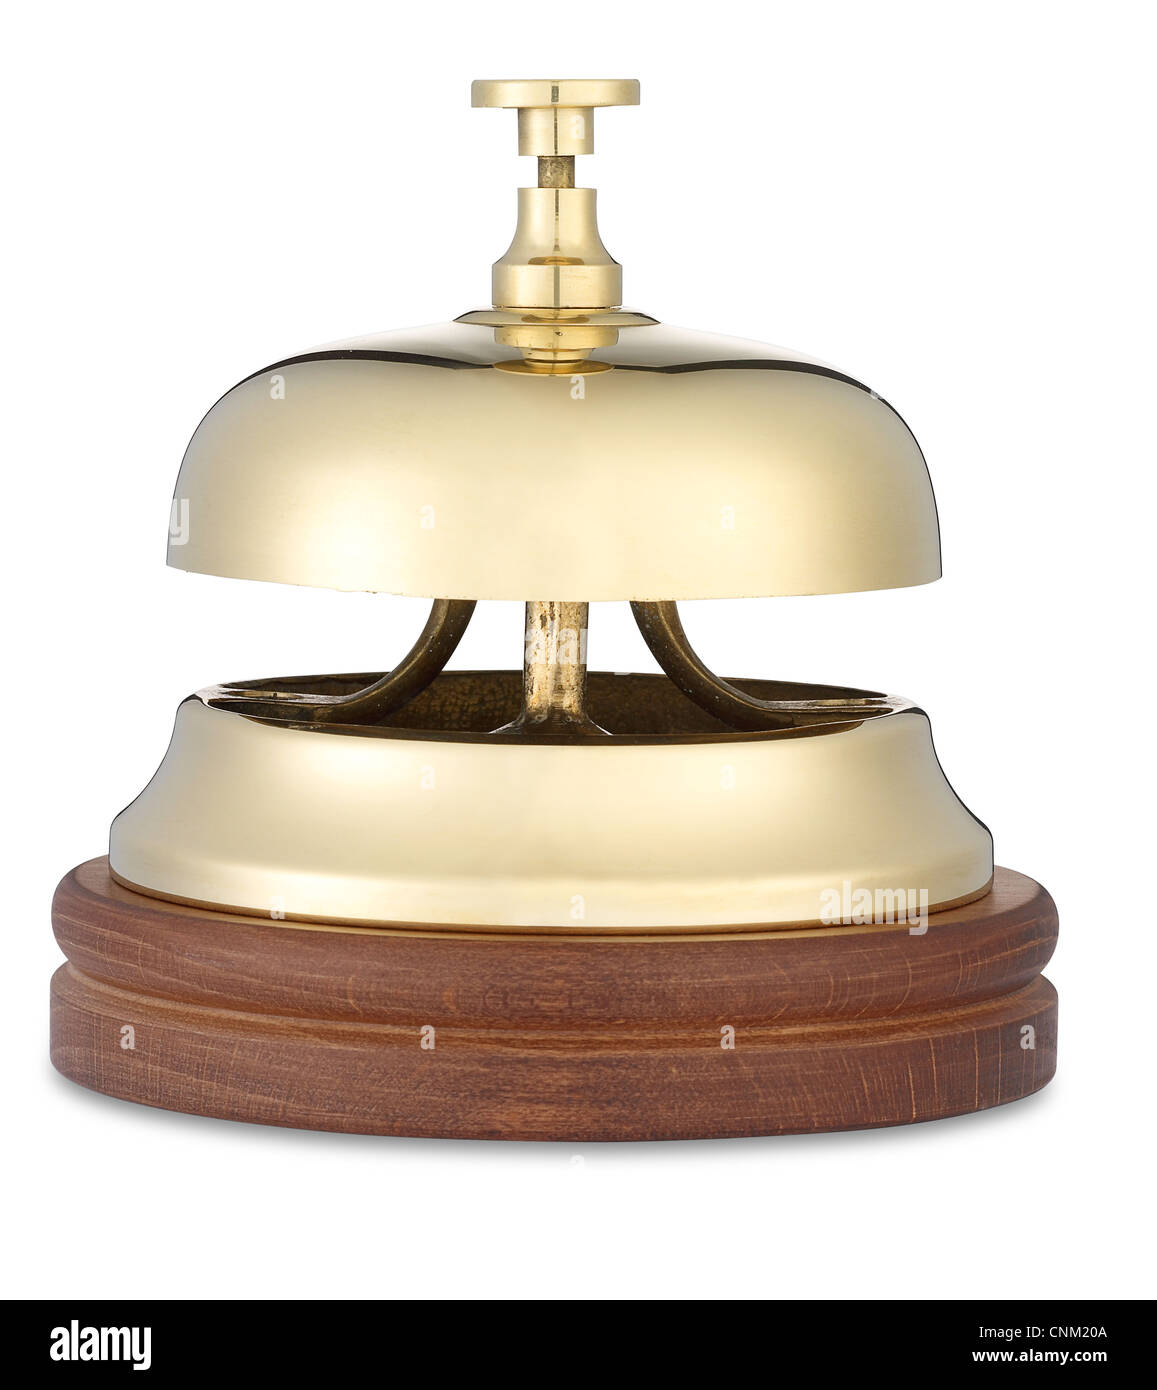 Un brass bell hotel low angle on white with clipping path Banque D'Images